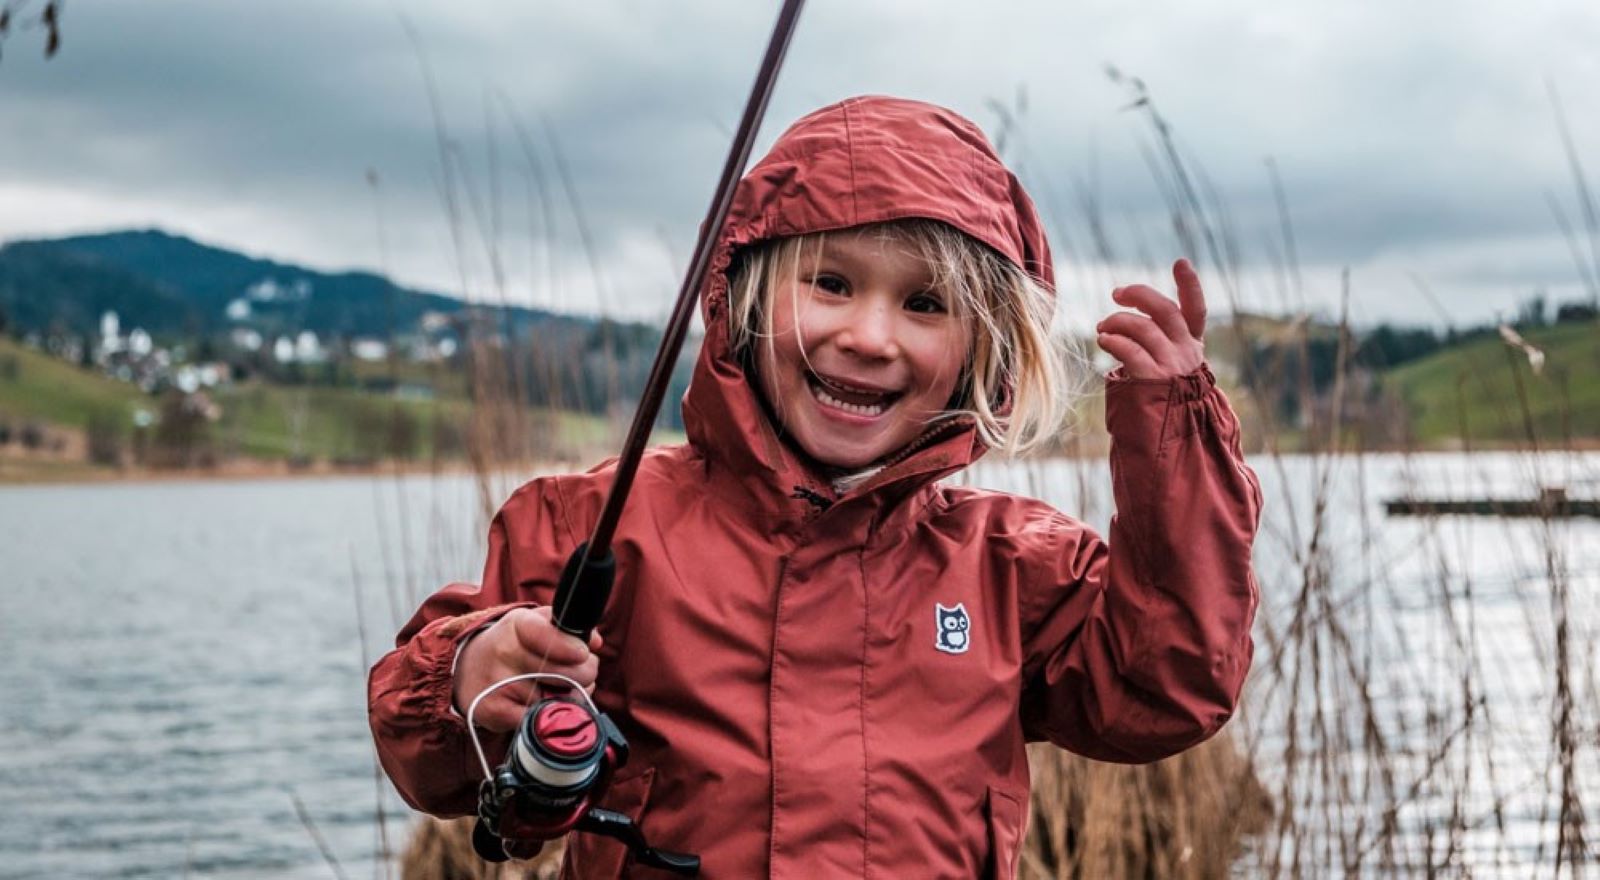 Namuk specialise in high-quality outdoor clothing for kids